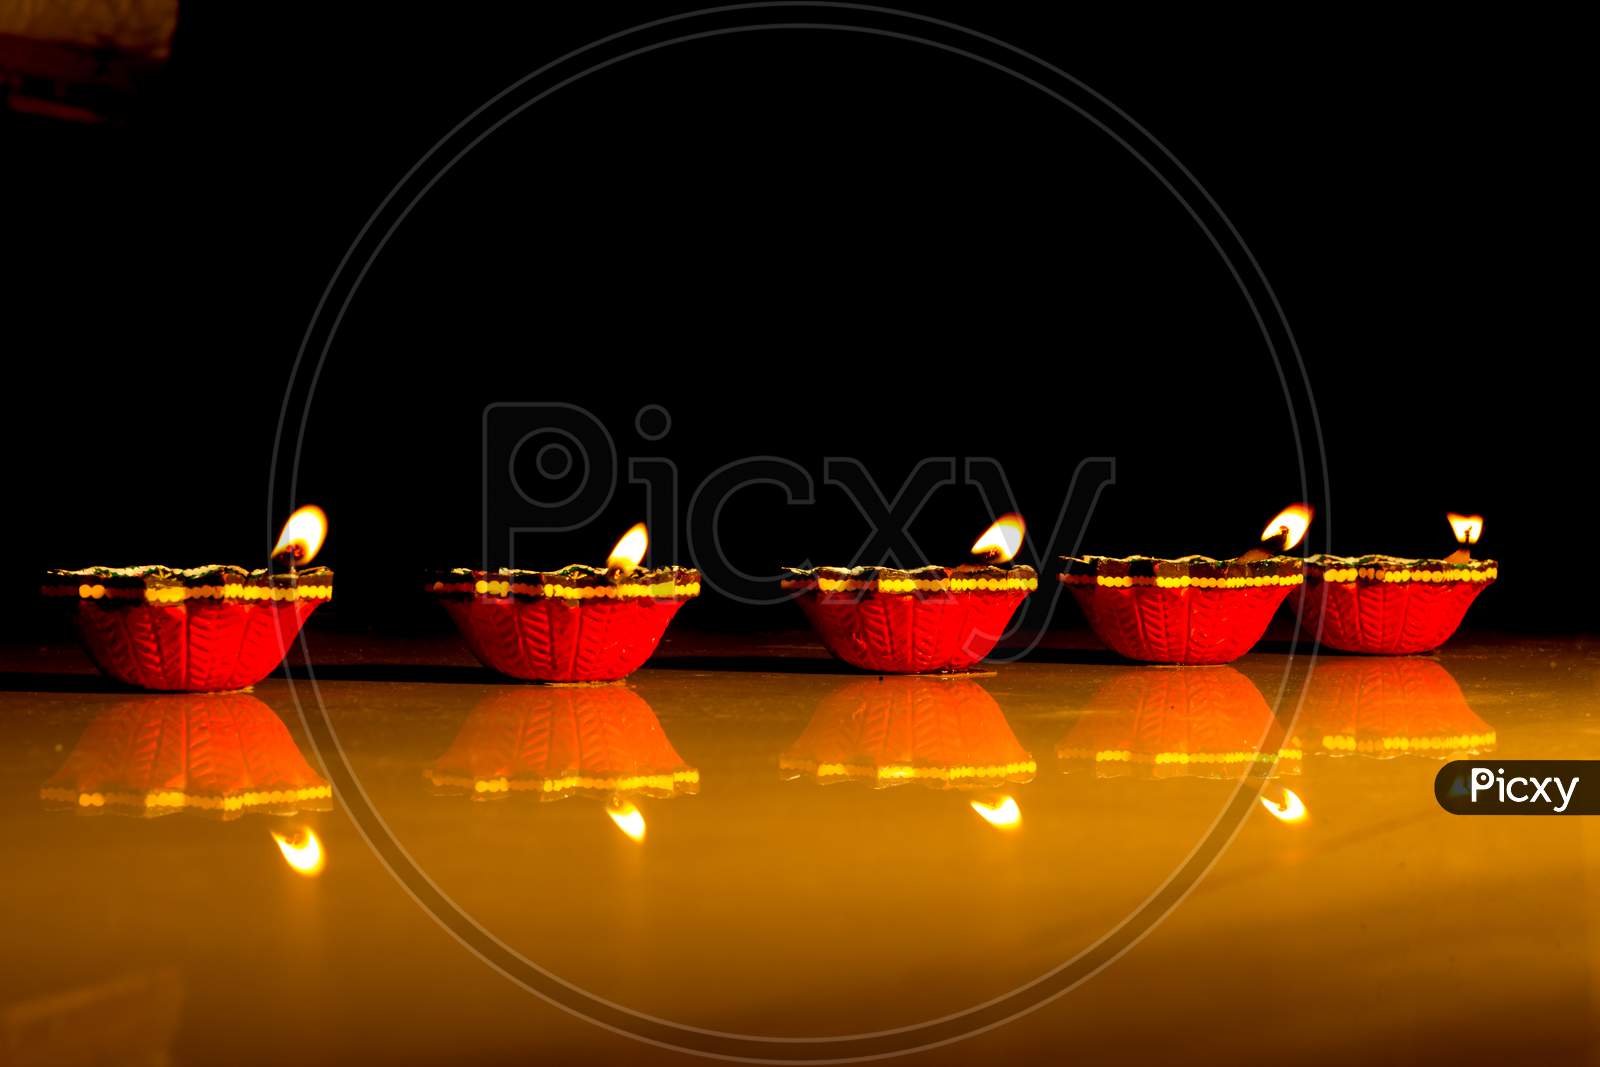 A Dramatic view of traditional Earthen lamps lit with oil and Wicks against dark background for the Diwali festival of Lights which is Celebrated across India.